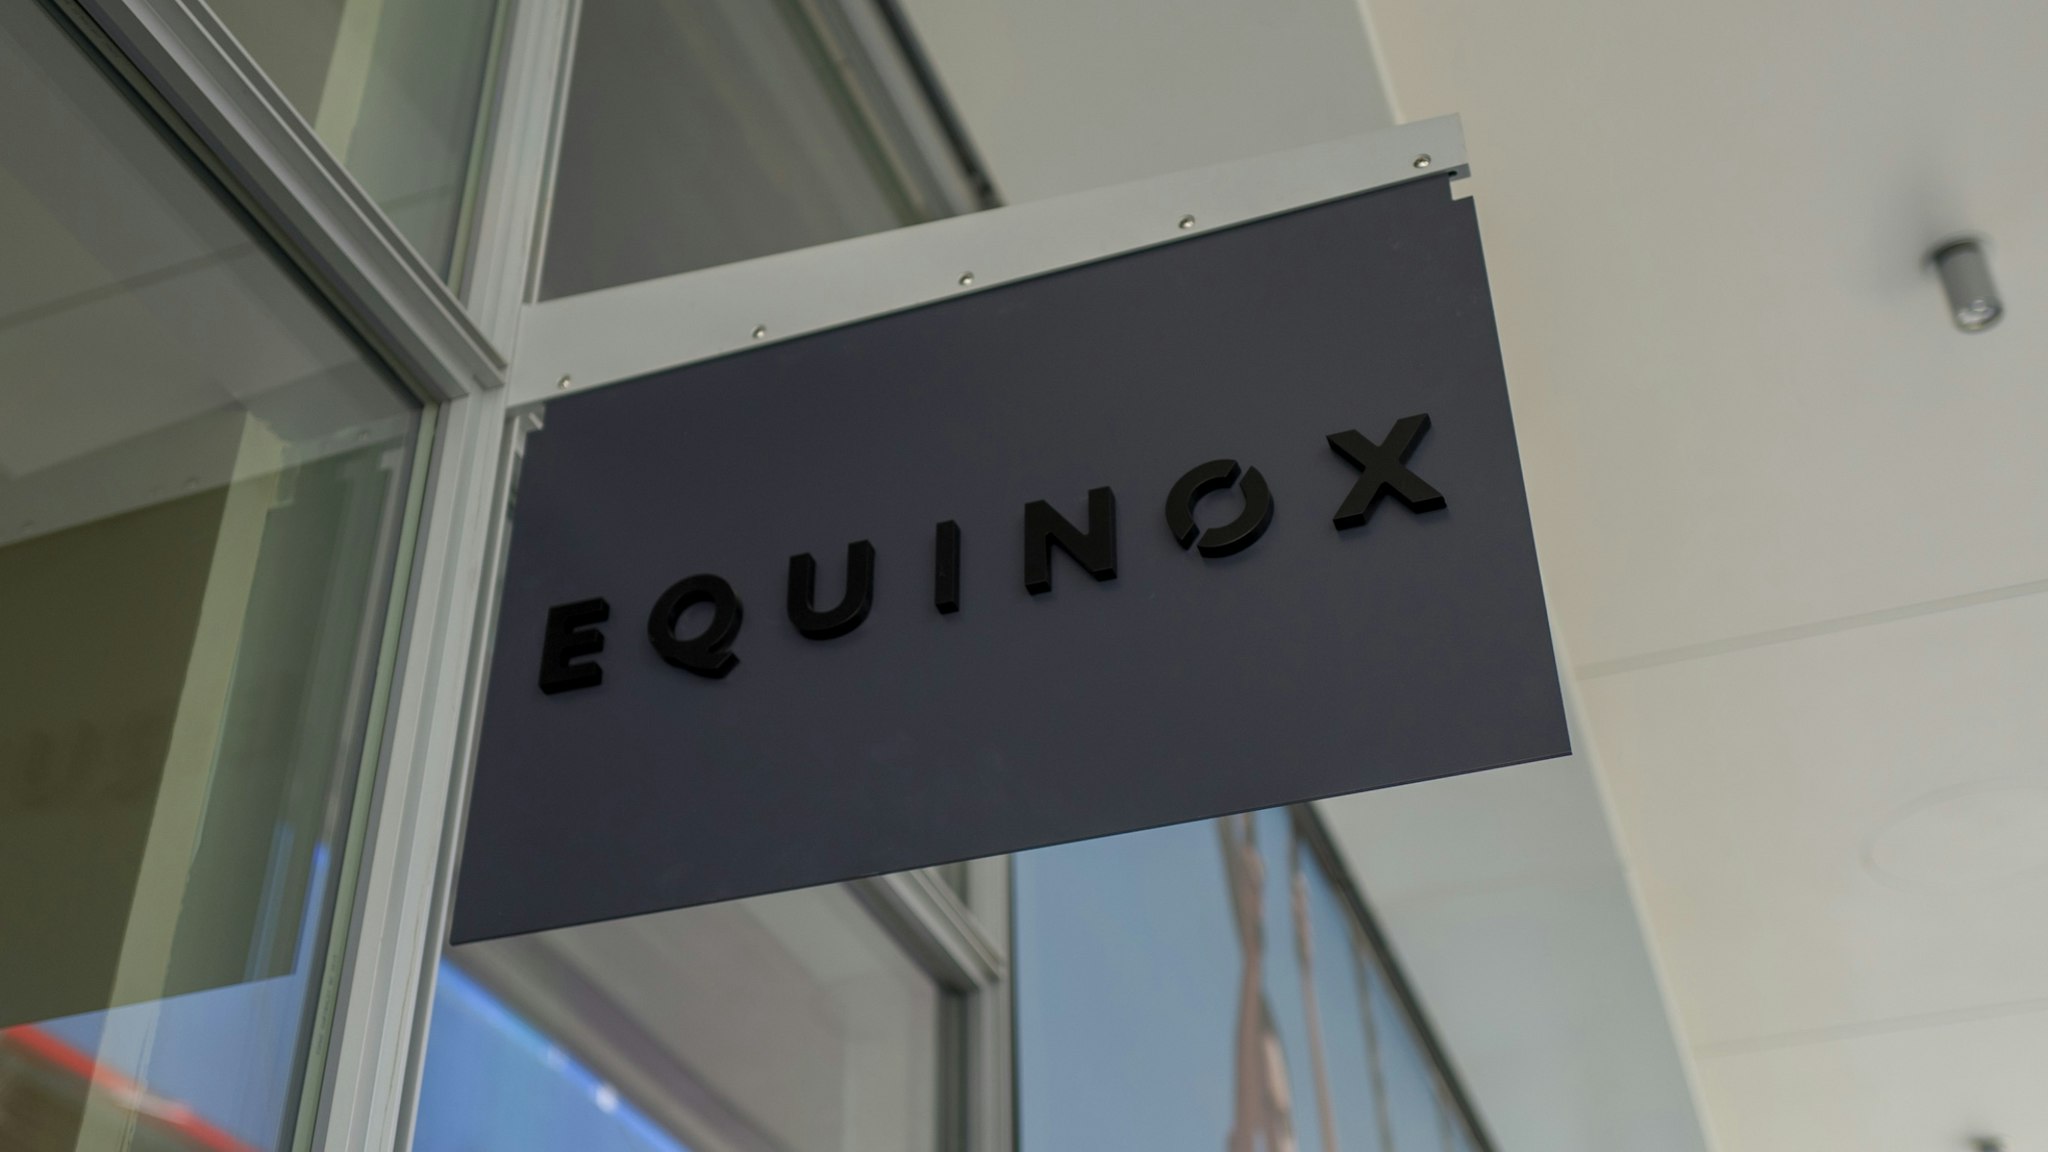 Close-up of sign for luxury gym Equinox in San Ramon, California, March 12, 2019.